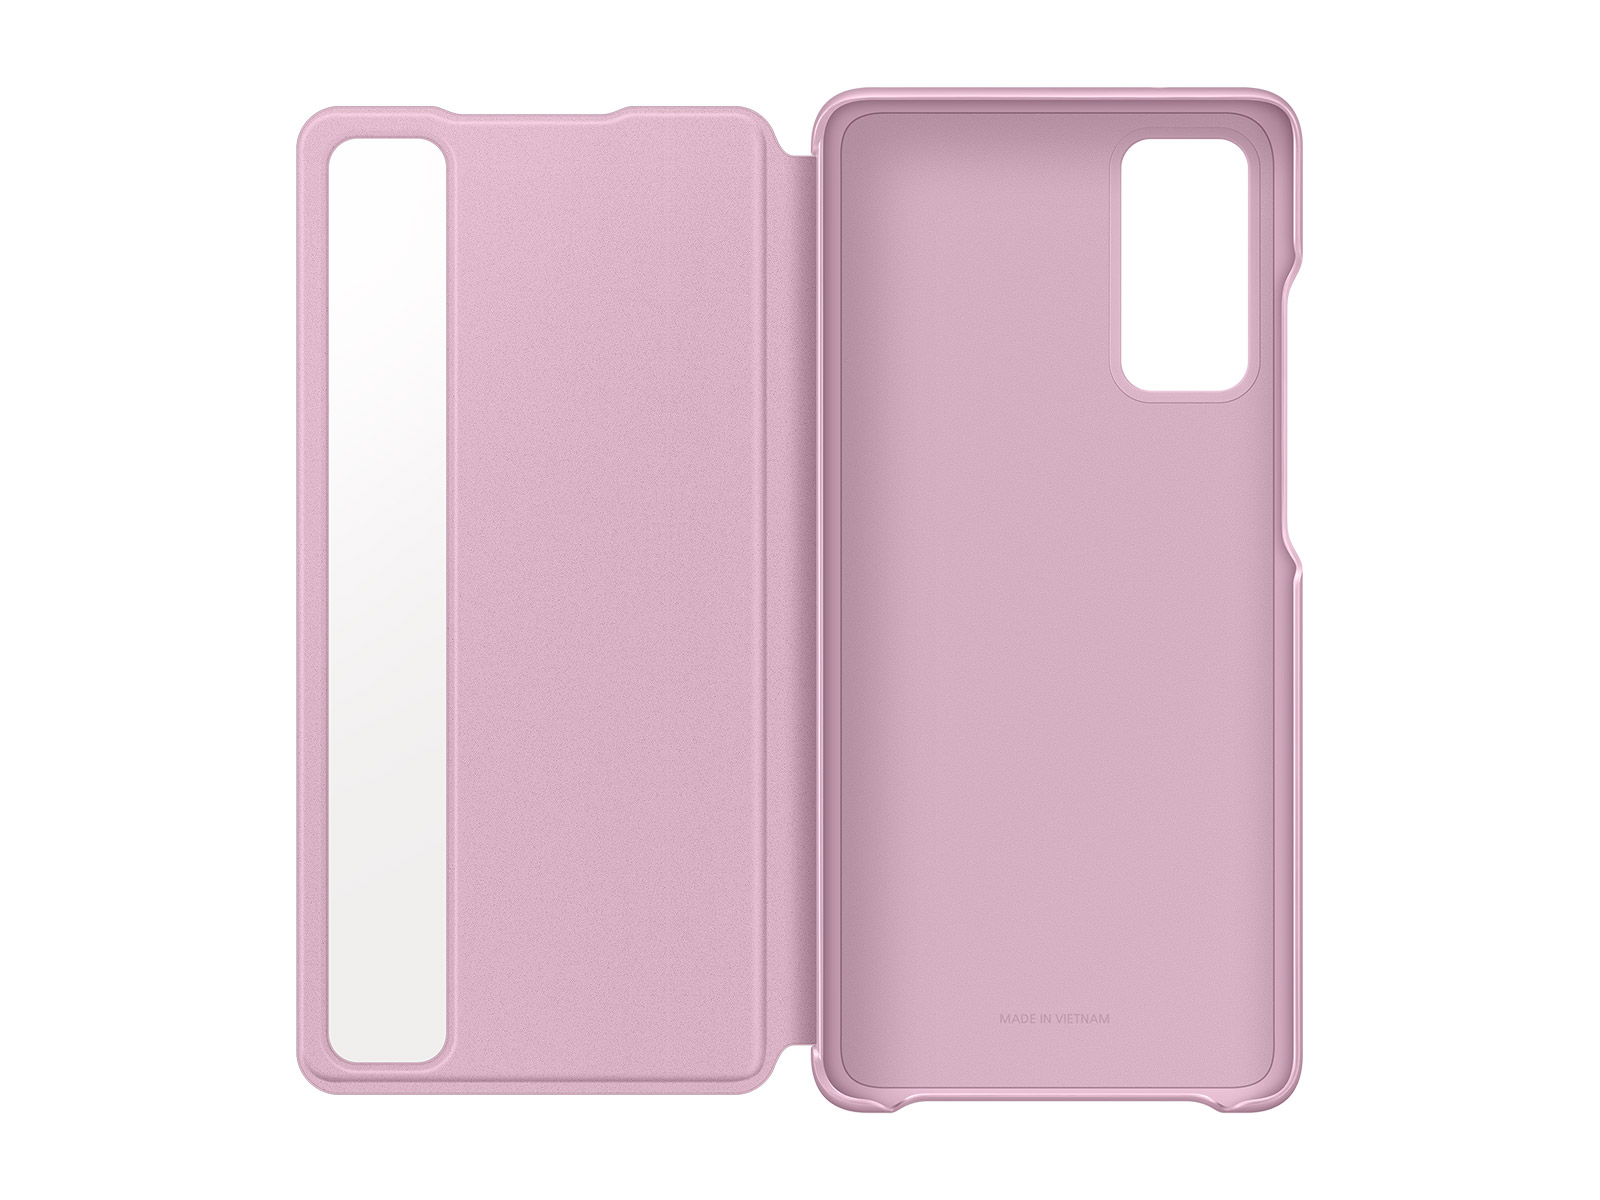 Thumbnail image of Galaxy S20 FE 5G S-View Flip Cover, Lavender